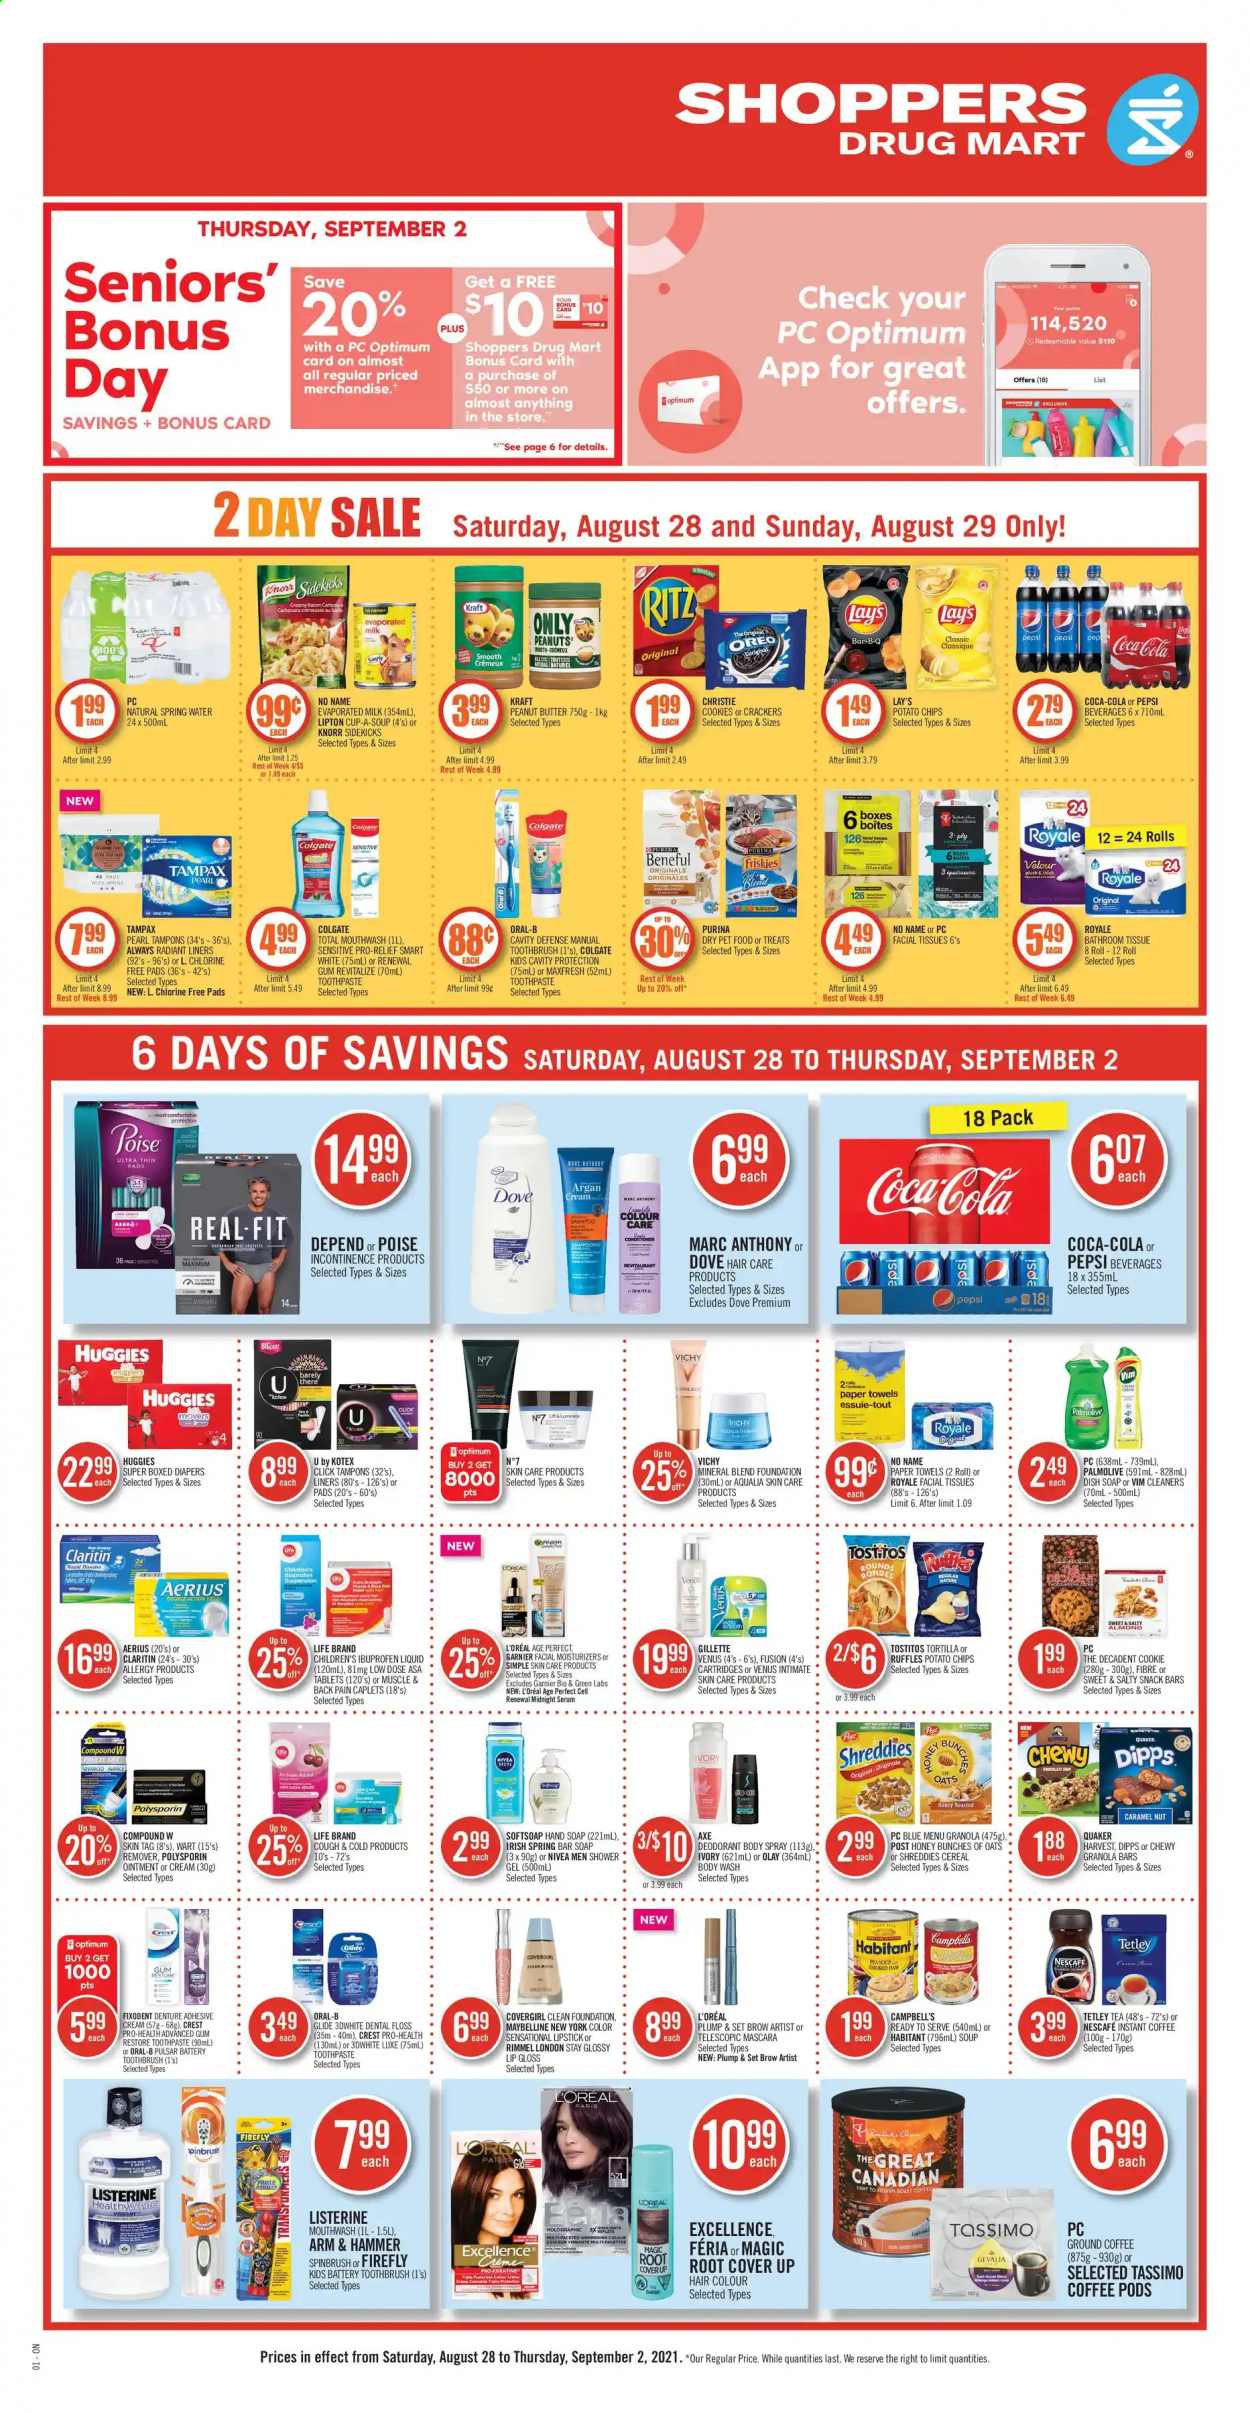 thumbnail - Shoppers Drug Mart Flyer - August 28, 2021 - September 02, 2021 - Sales products - cookies, snack, crackers, snack bar, RITZ, tortillas, potato chips, Lay’s, Ruffles, Tostitos, ARM & HAMMER, soup, cereals, granola bar, Quaker, Campbell's, Kraft®, peanut butter, peanuts, Coca-Cola, Pepsi, spring water, tea, coffee pods, instant coffee, ground coffee, Gevalia, nappies, ointment, bath tissue, kitchen towels, paper towels, body wash, shower gel, Softsoap, Vichy, hand soap, Palmolive, soap bar, soap, toothbrush, toothpaste, mouthwash, Fixodent, Crest, Kotex, tampons, facial tissues, L’Oréal, moisturizer, serum, Olay, conditioner, hair color, body spray, anti-perspirant, Venus, lip gloss, Rimmel, Ibuprofen, Low Dose, Oreo, Knorr, Garnier, Gillette, Listerine, mascara, Maybelline, shampoo, Tampax, Huggies, Nivea, Oral-B, chips, Nescafé, deodorant. Page 1.